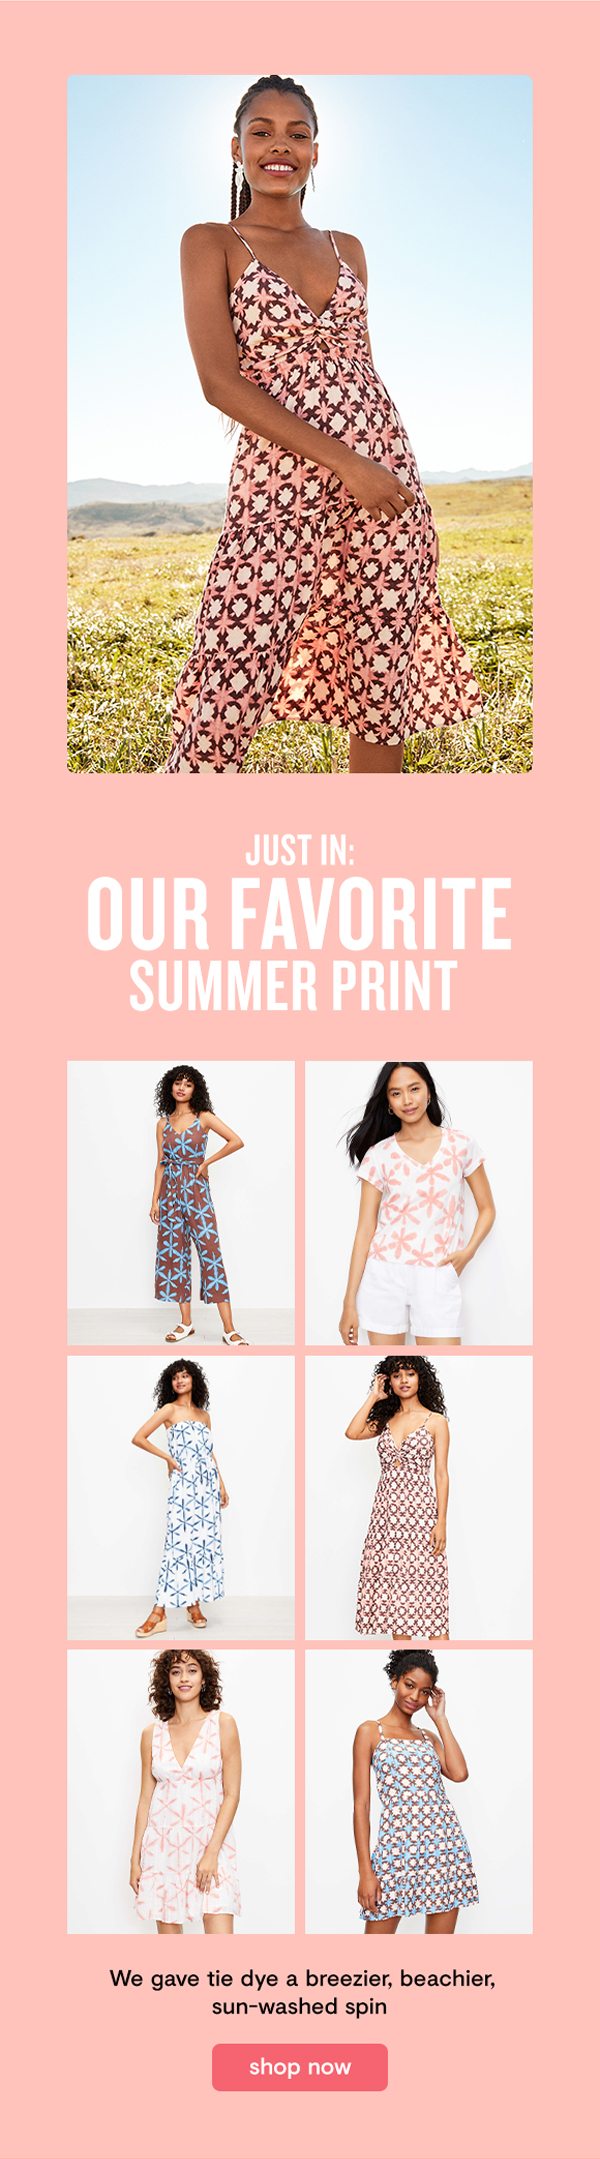 Just In: Our Favorite Summer Print